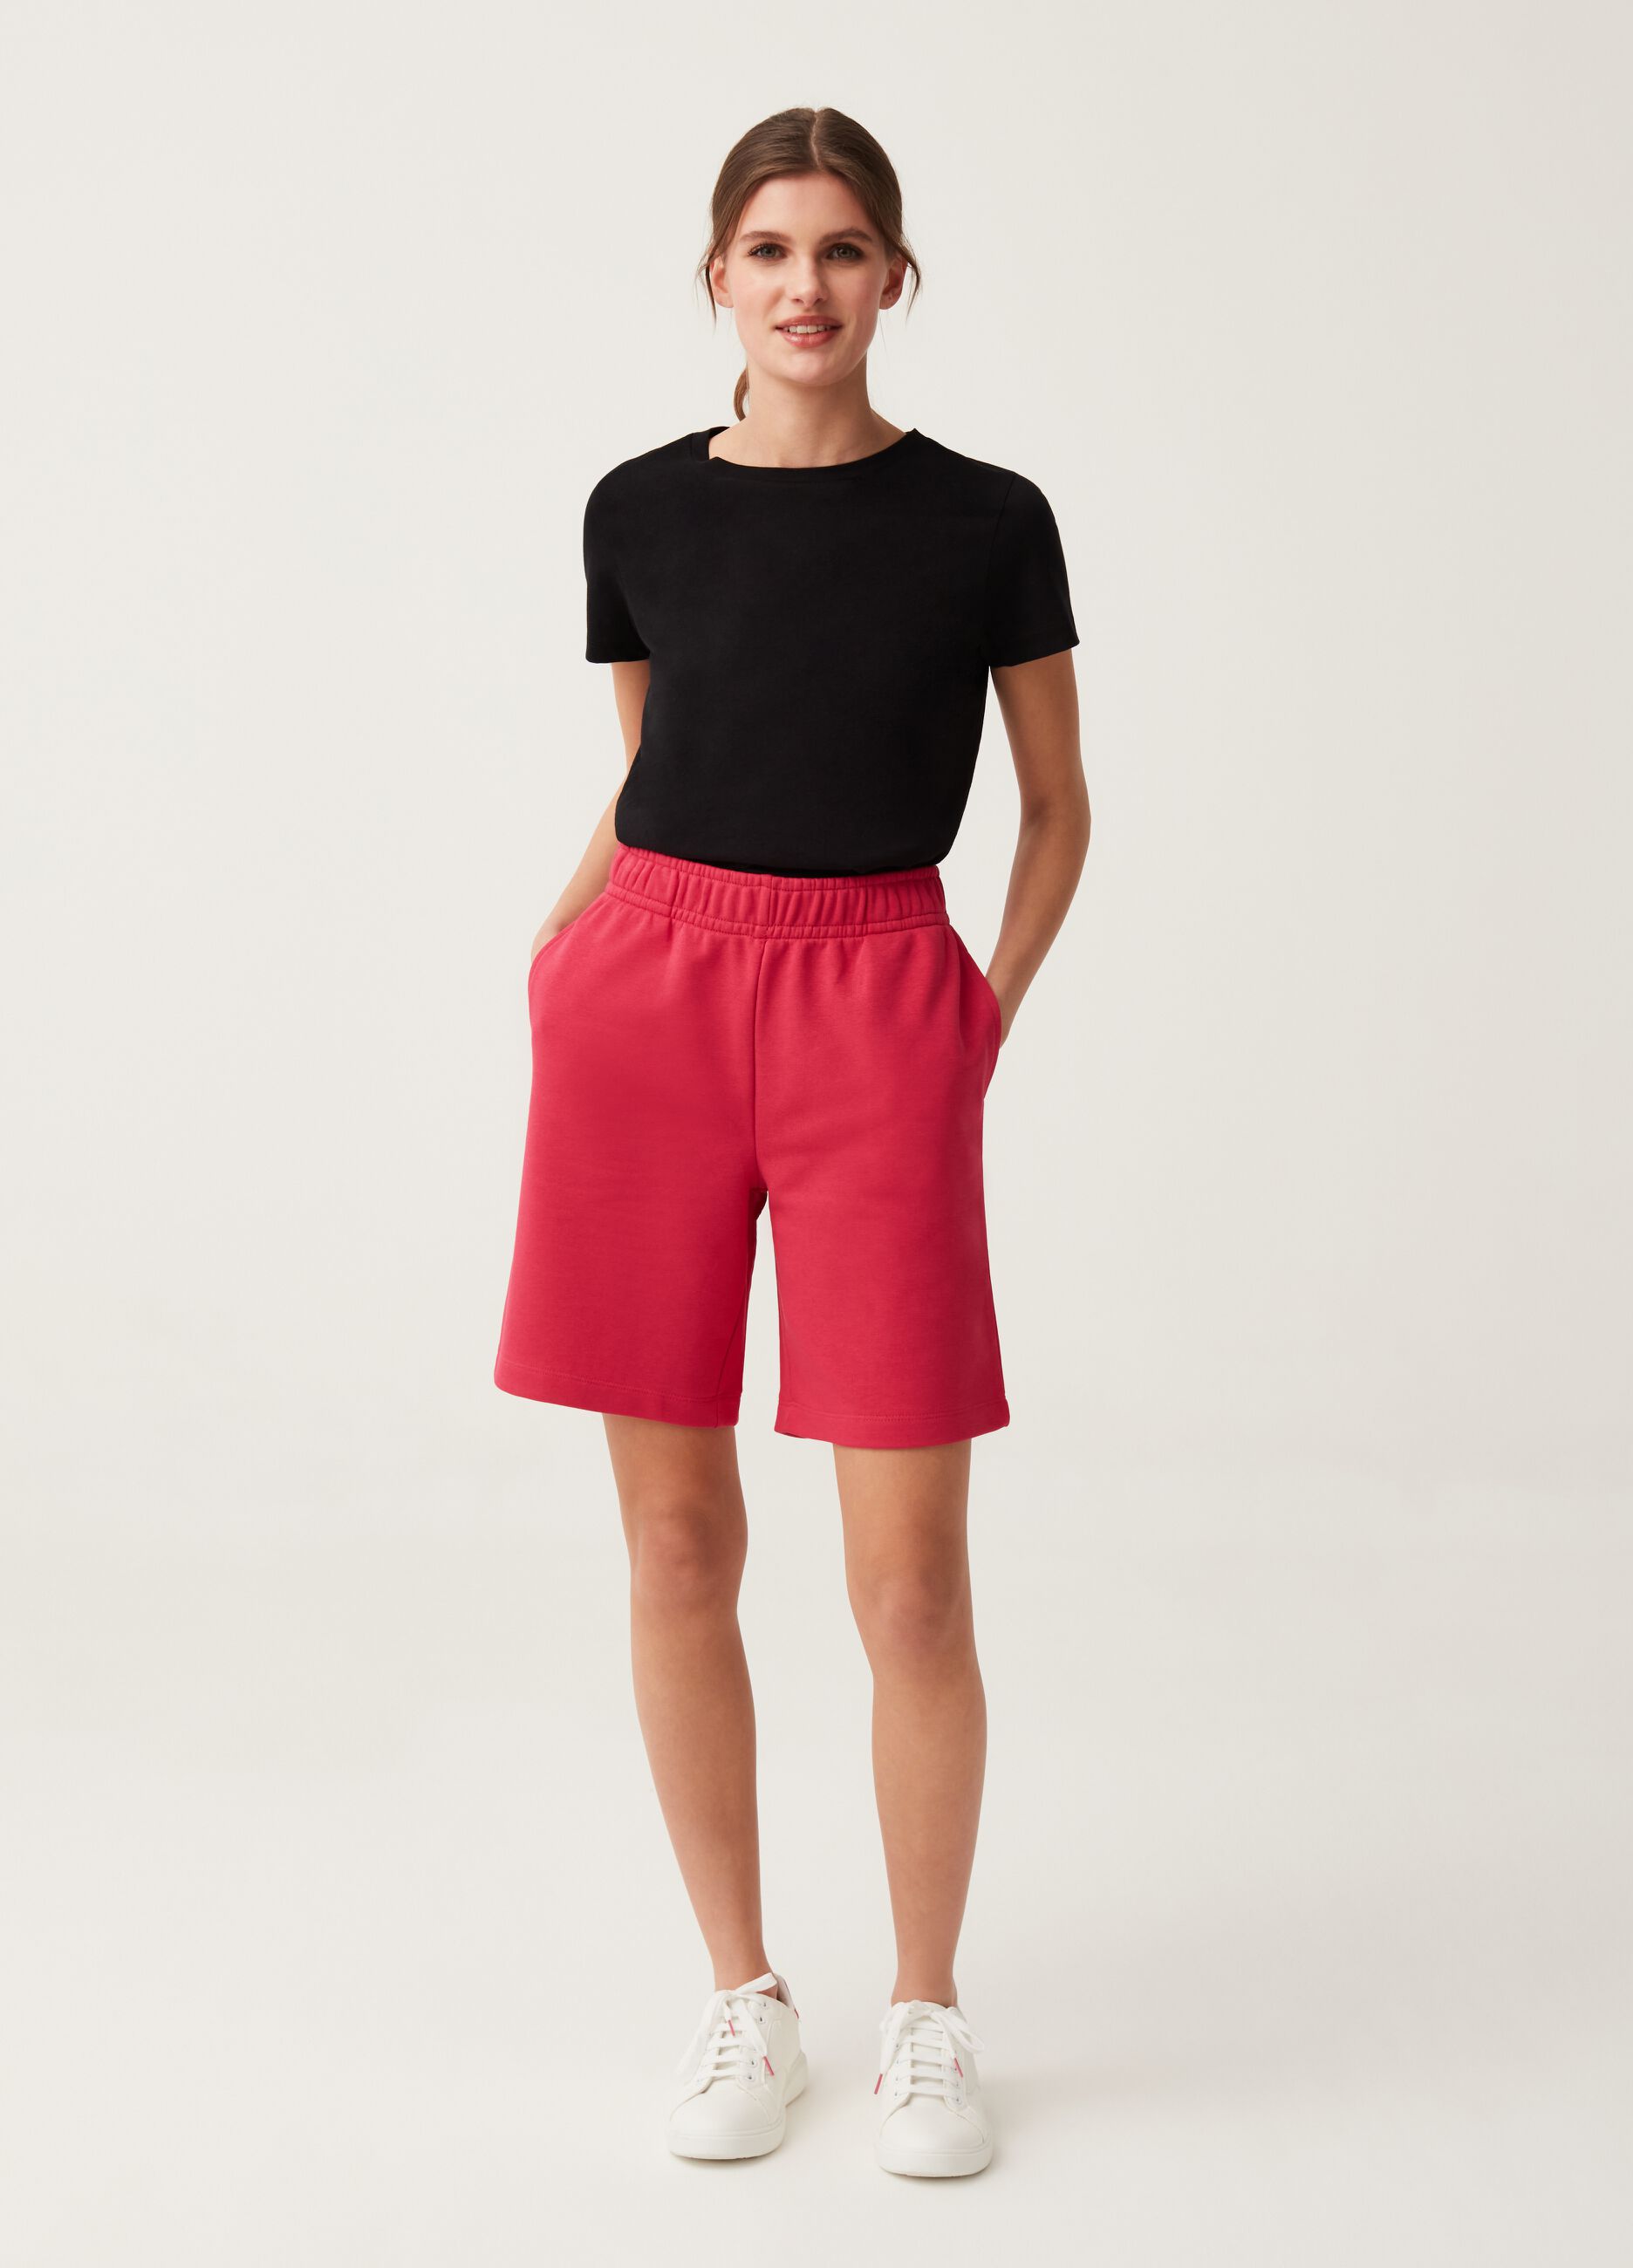 Fitness Bermuda shorts in French terry